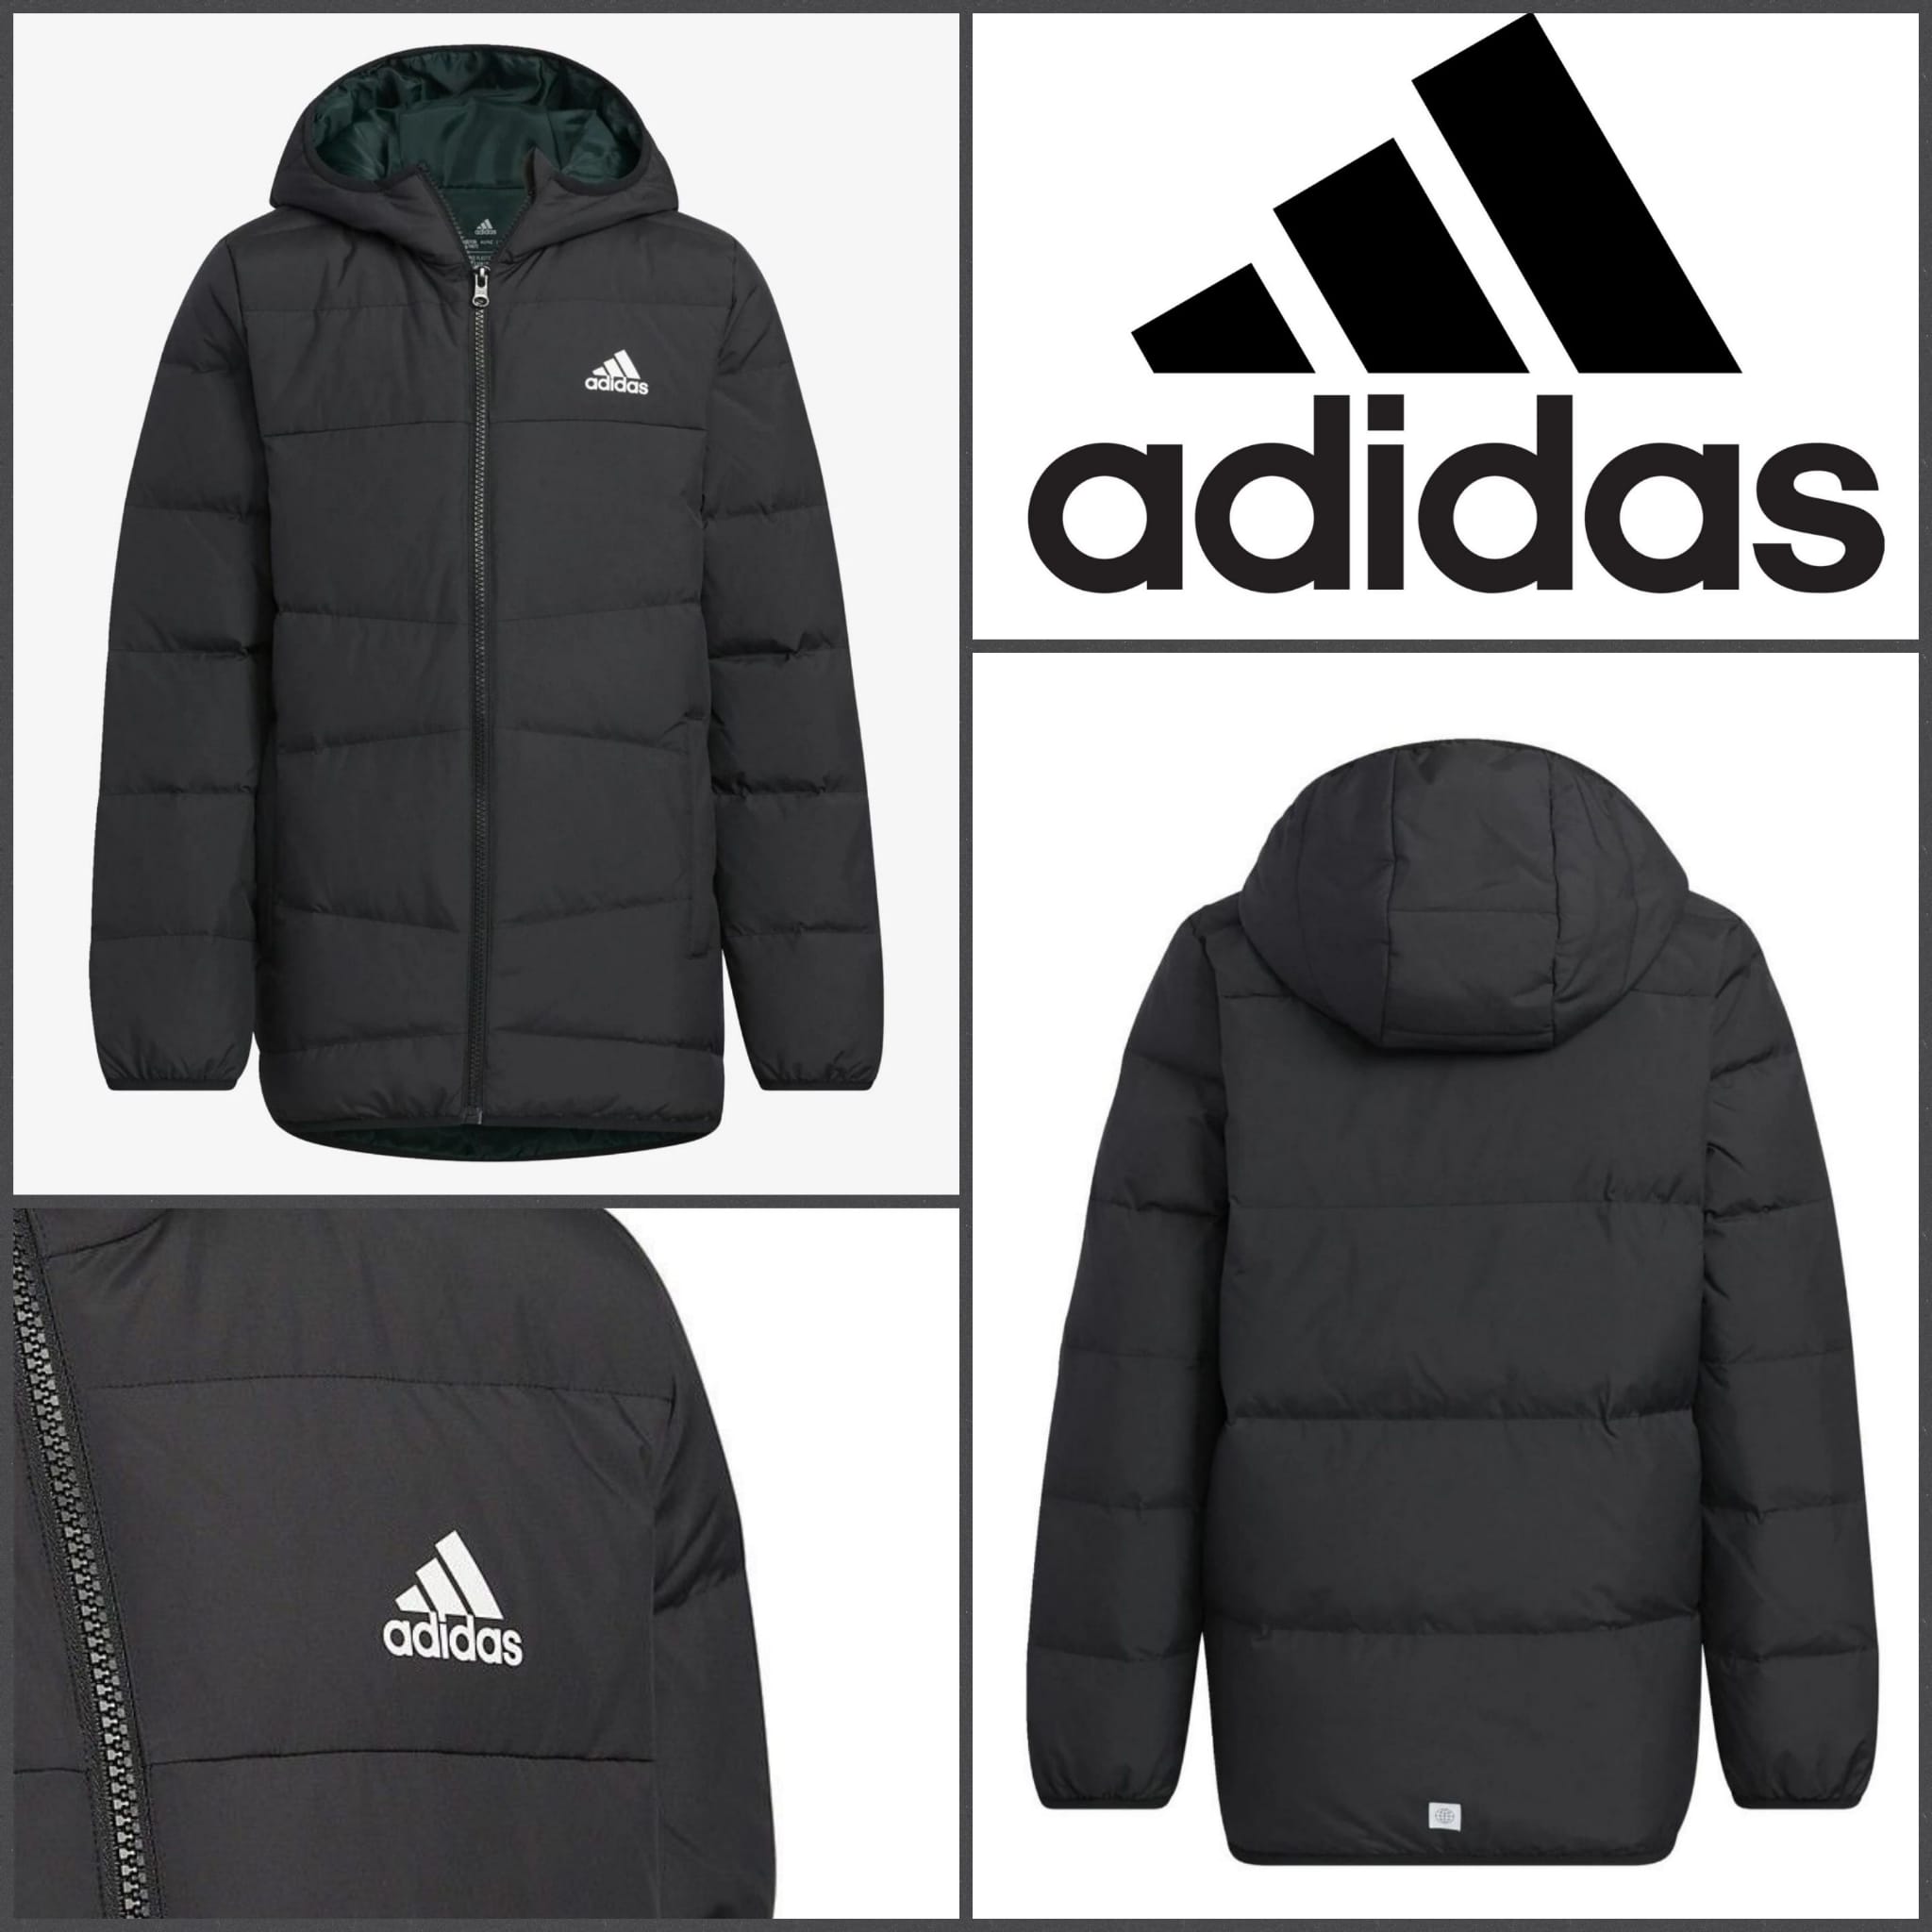 Down jackets from ADIDAS